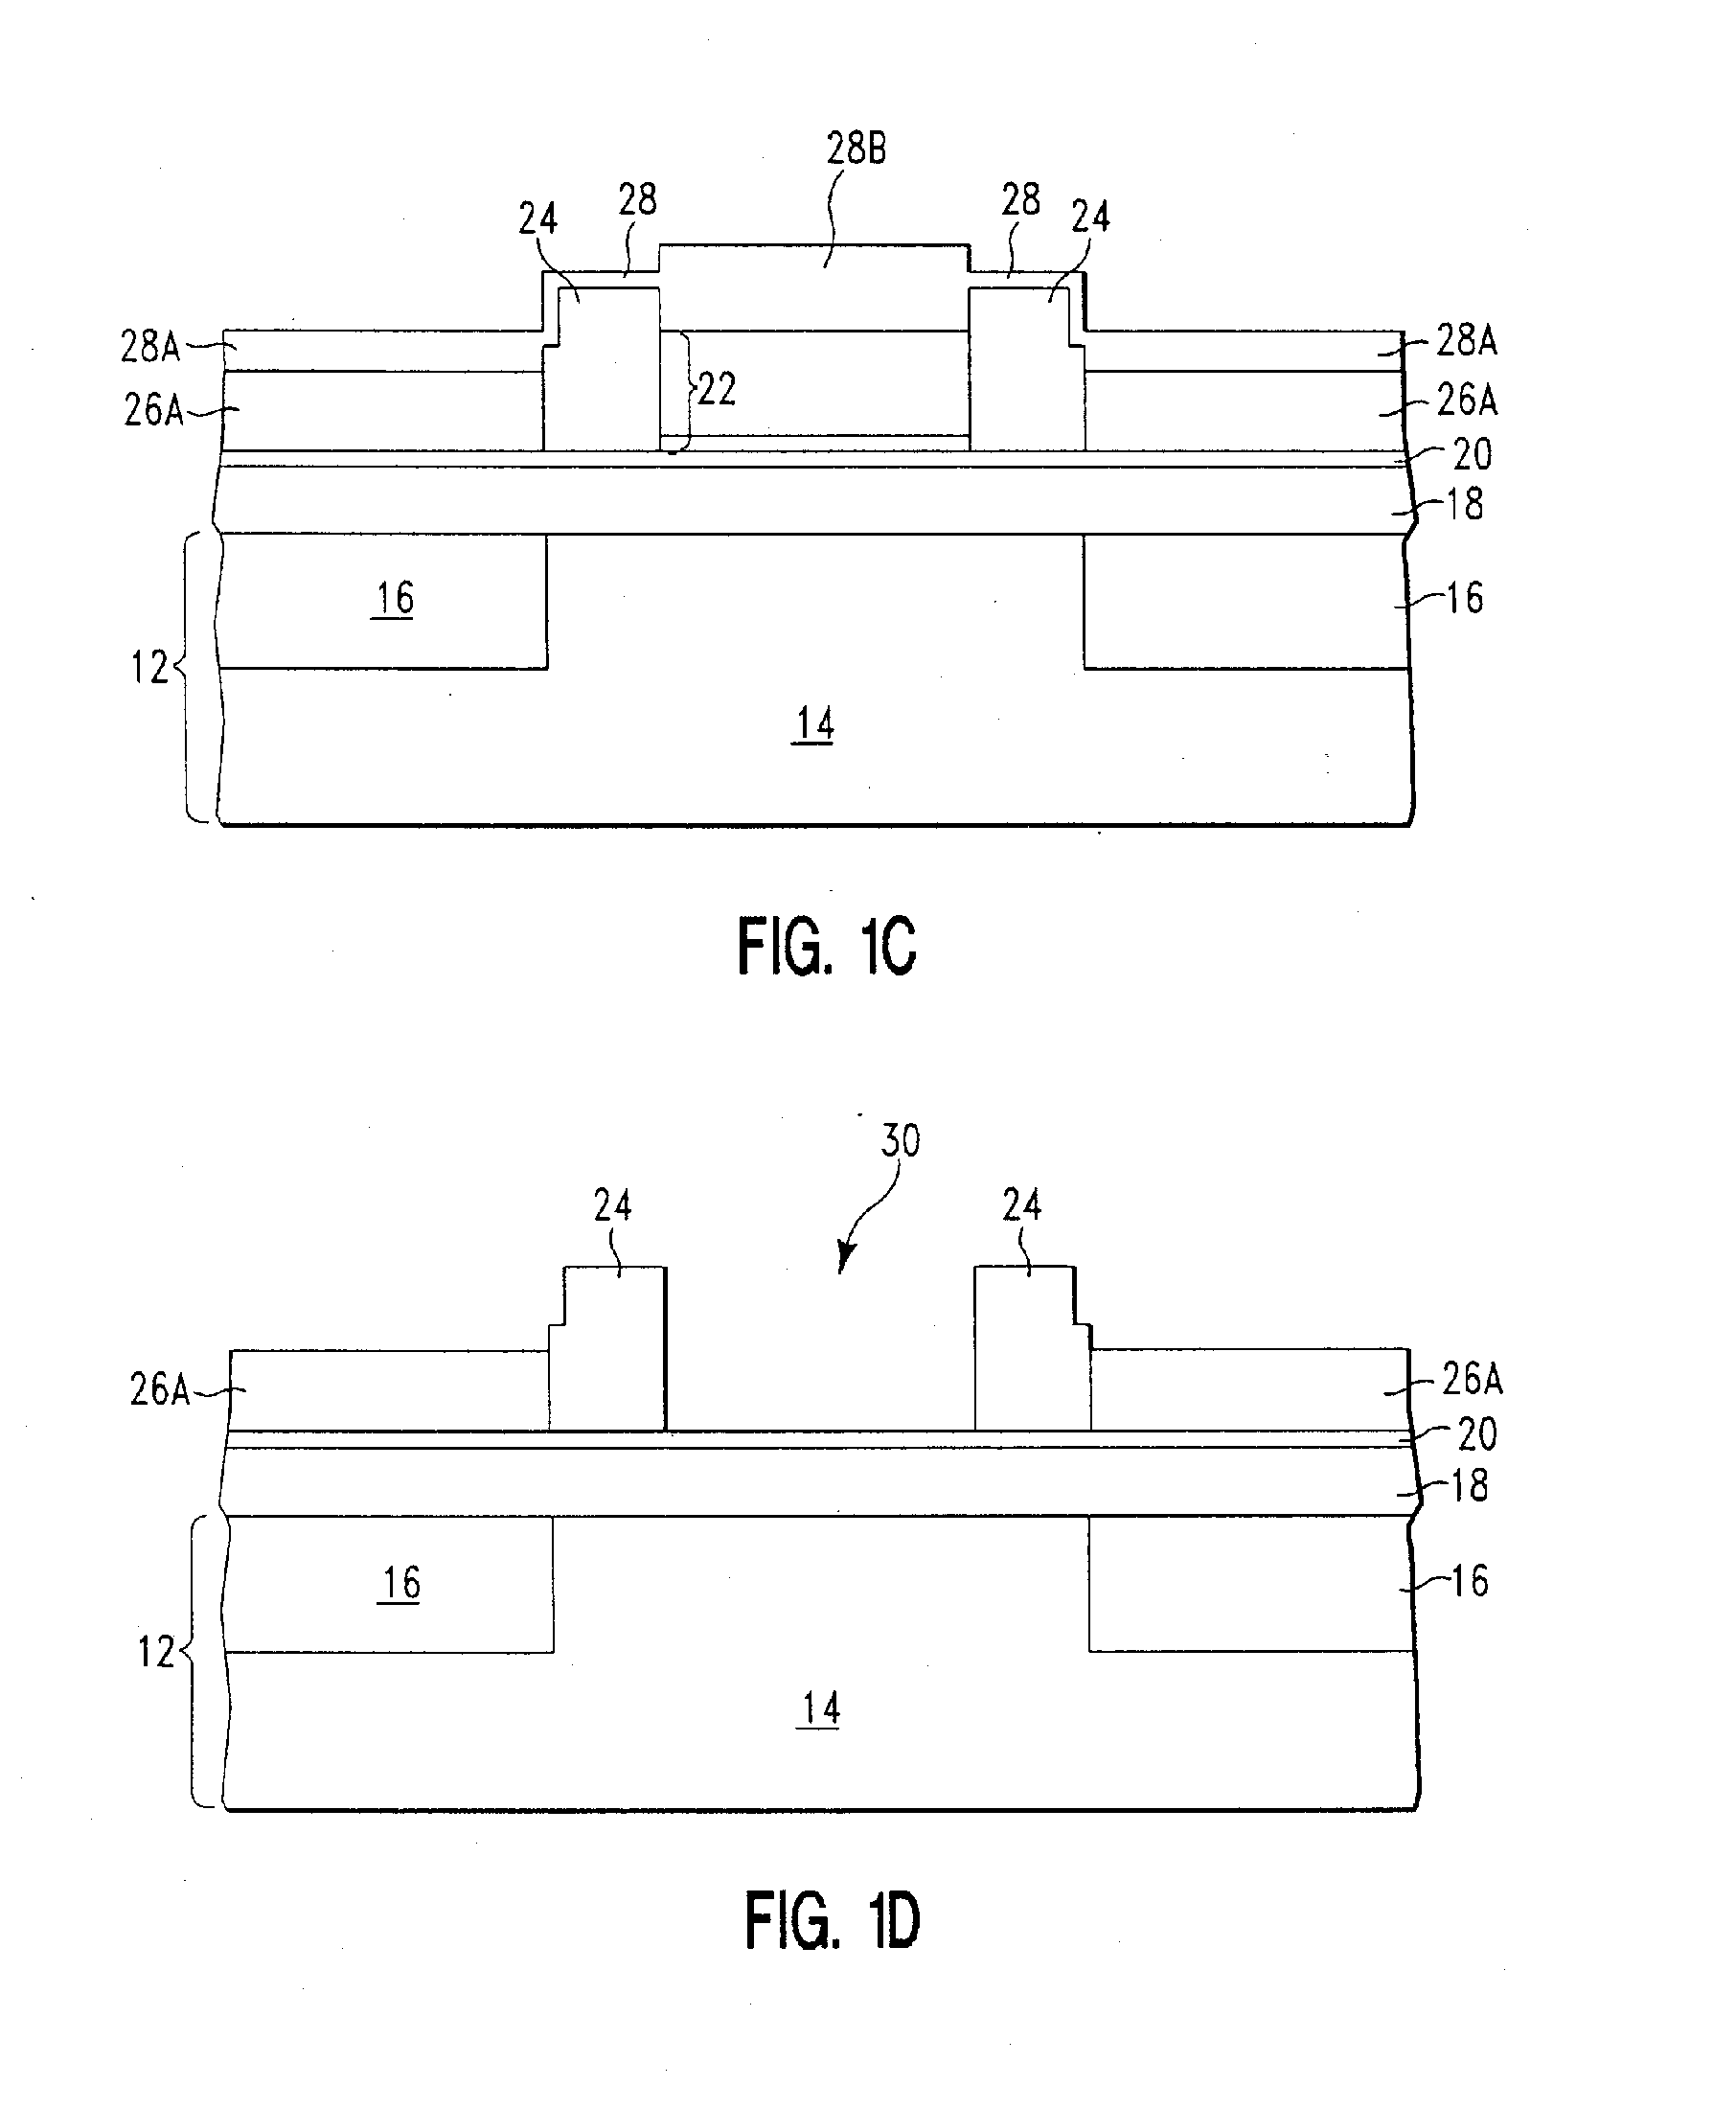 METHOD TO BUILD SELF-ALIGNED NPN IN ADVANCED BiCMOS TECHNOLOGY